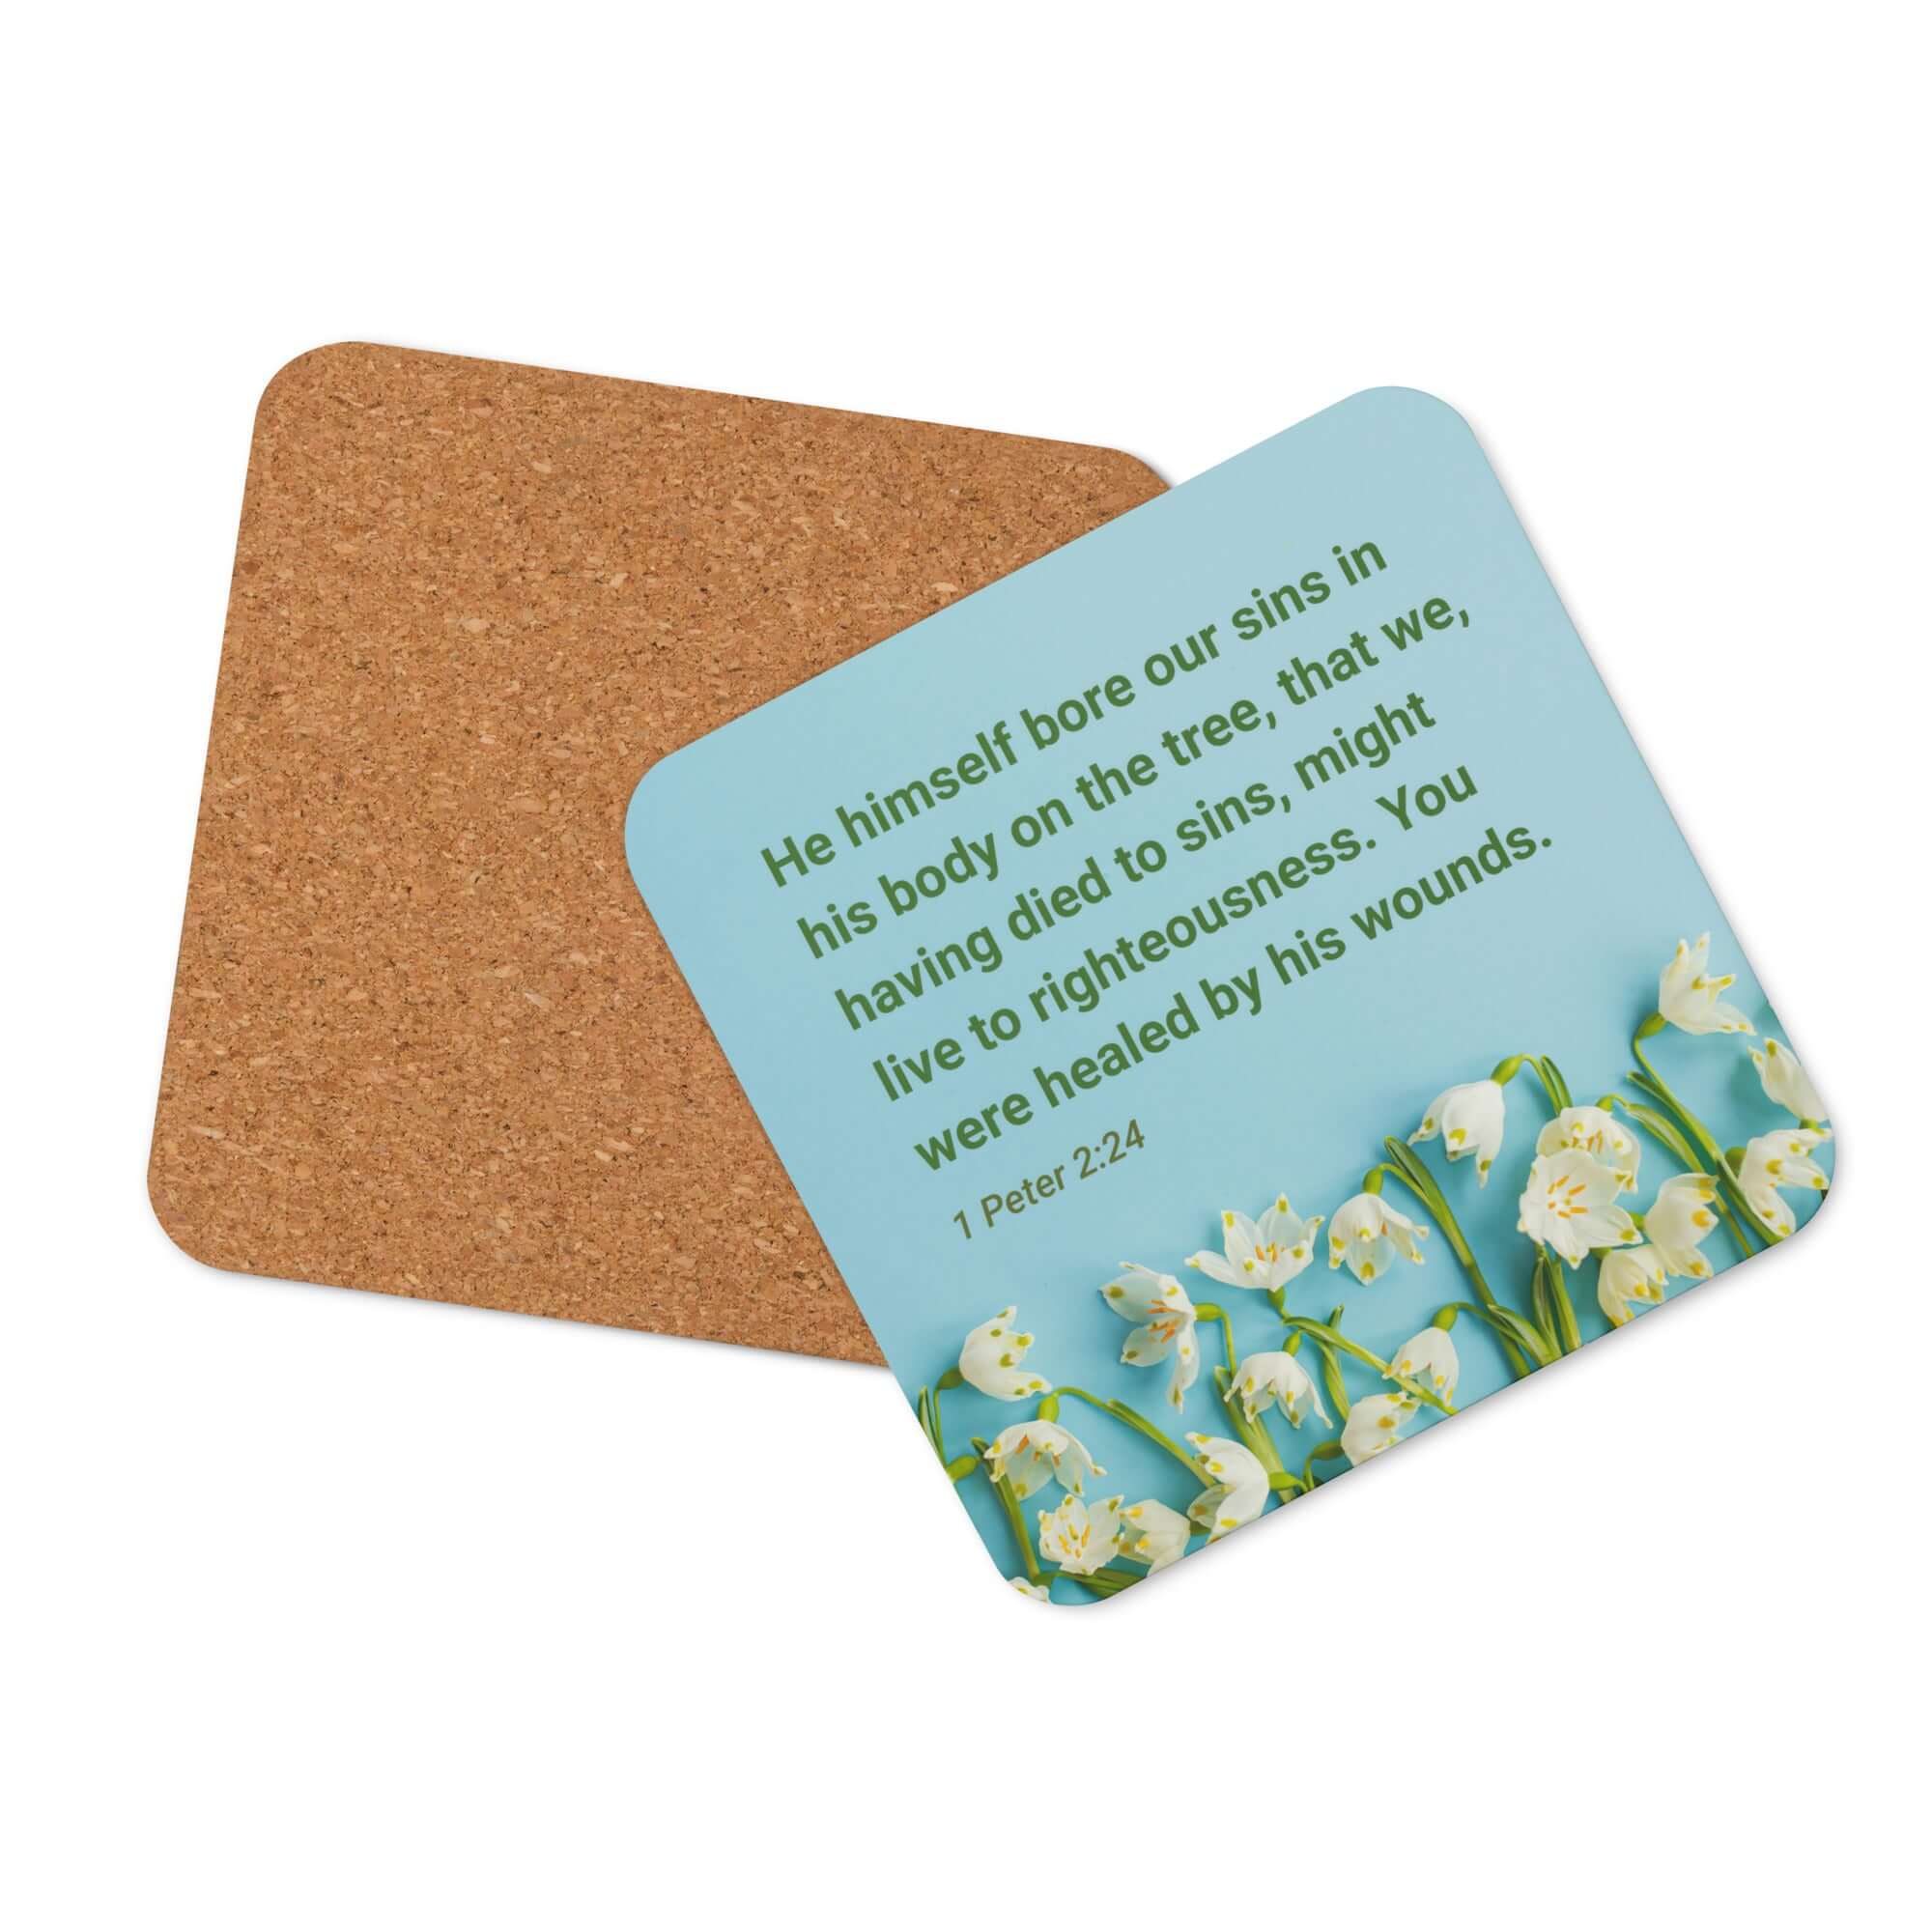 1 Peter 2:24 - Bible Verse, healed by His wounds Cork-Back Coaster